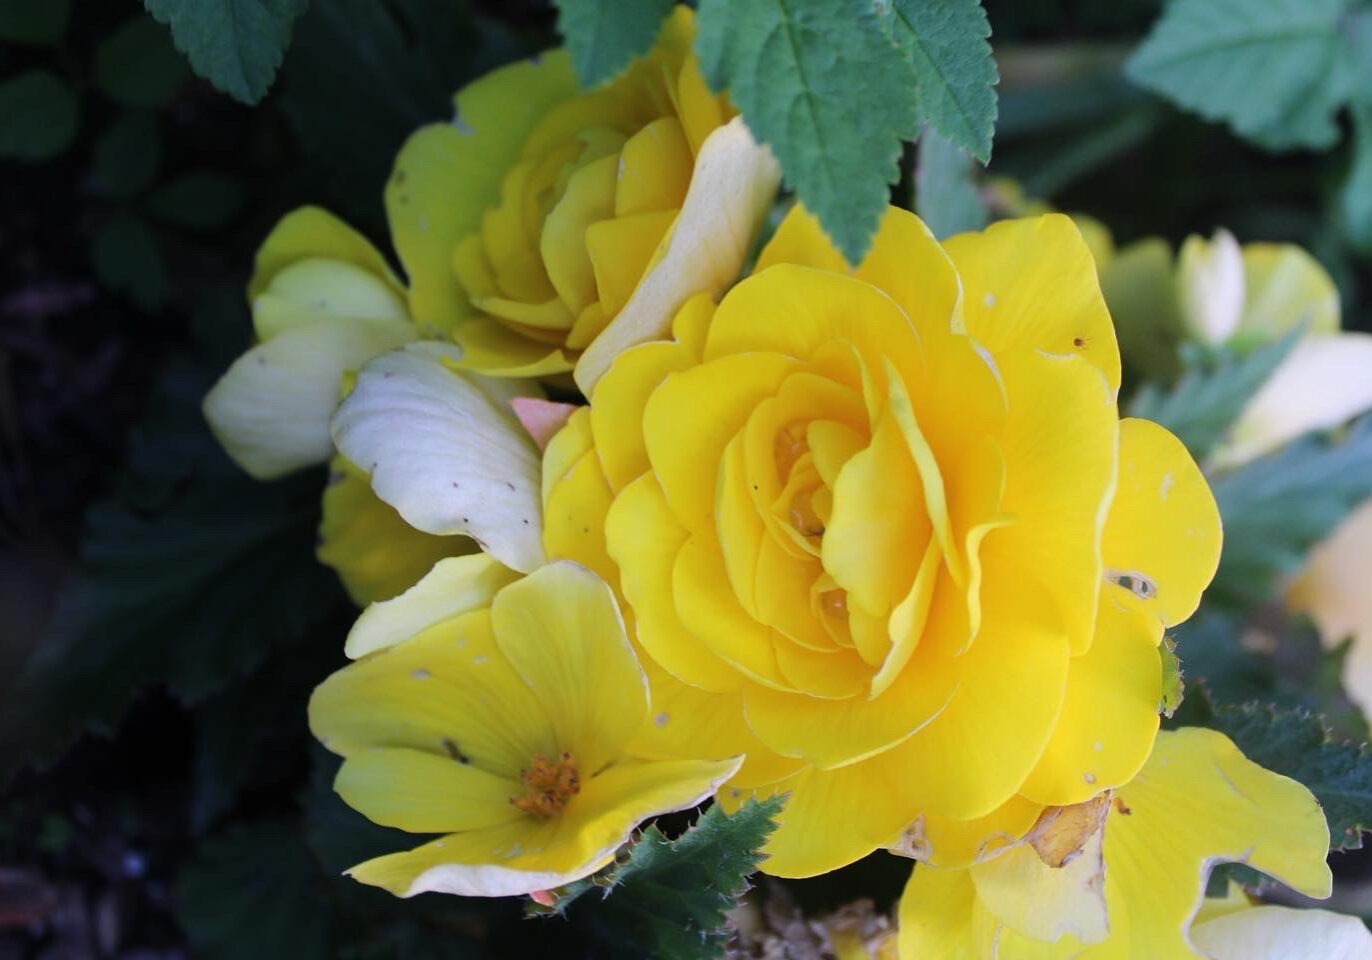 a close-up photo containing yellow roses on a dark background.